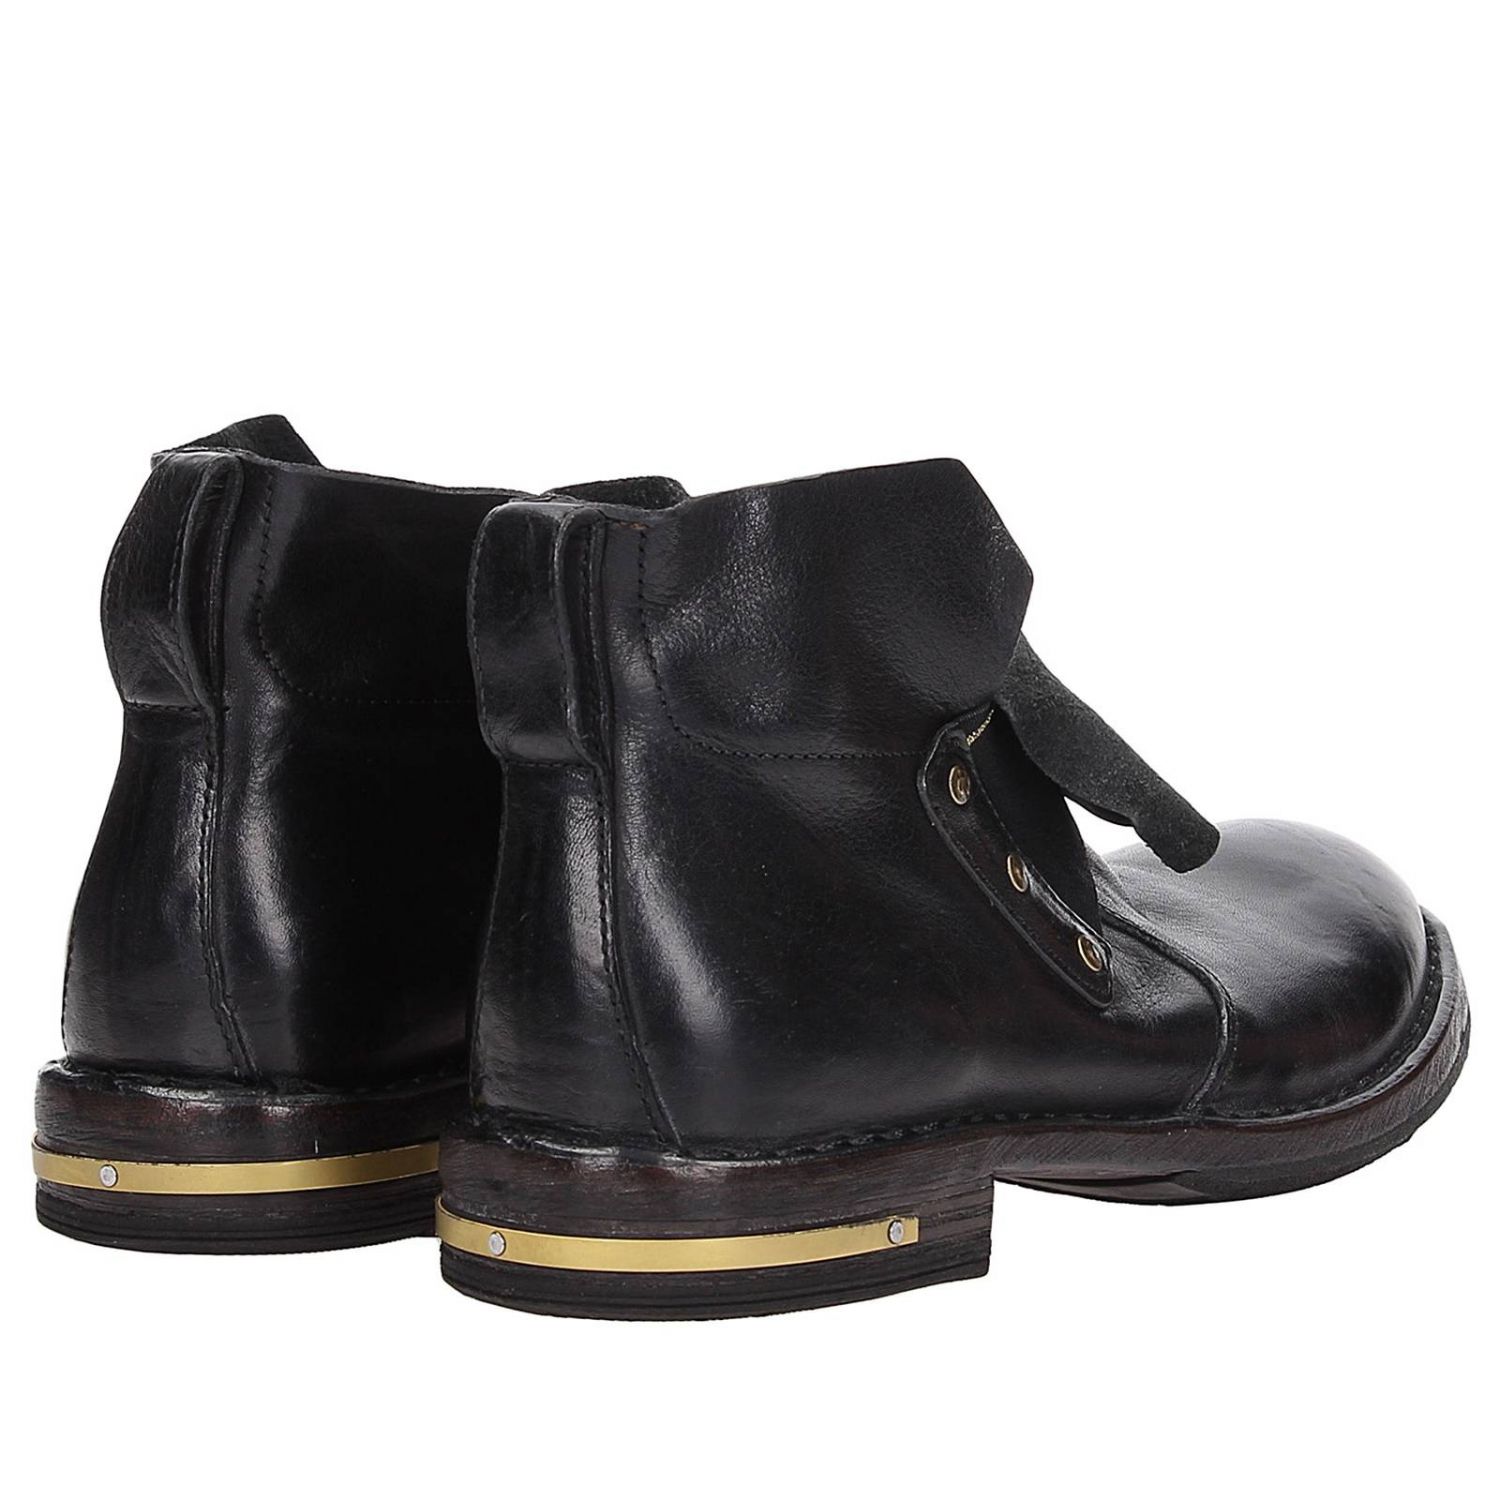 Moma Outlet: Flat booties women - Black | Flat Booties Moma 81806 ...